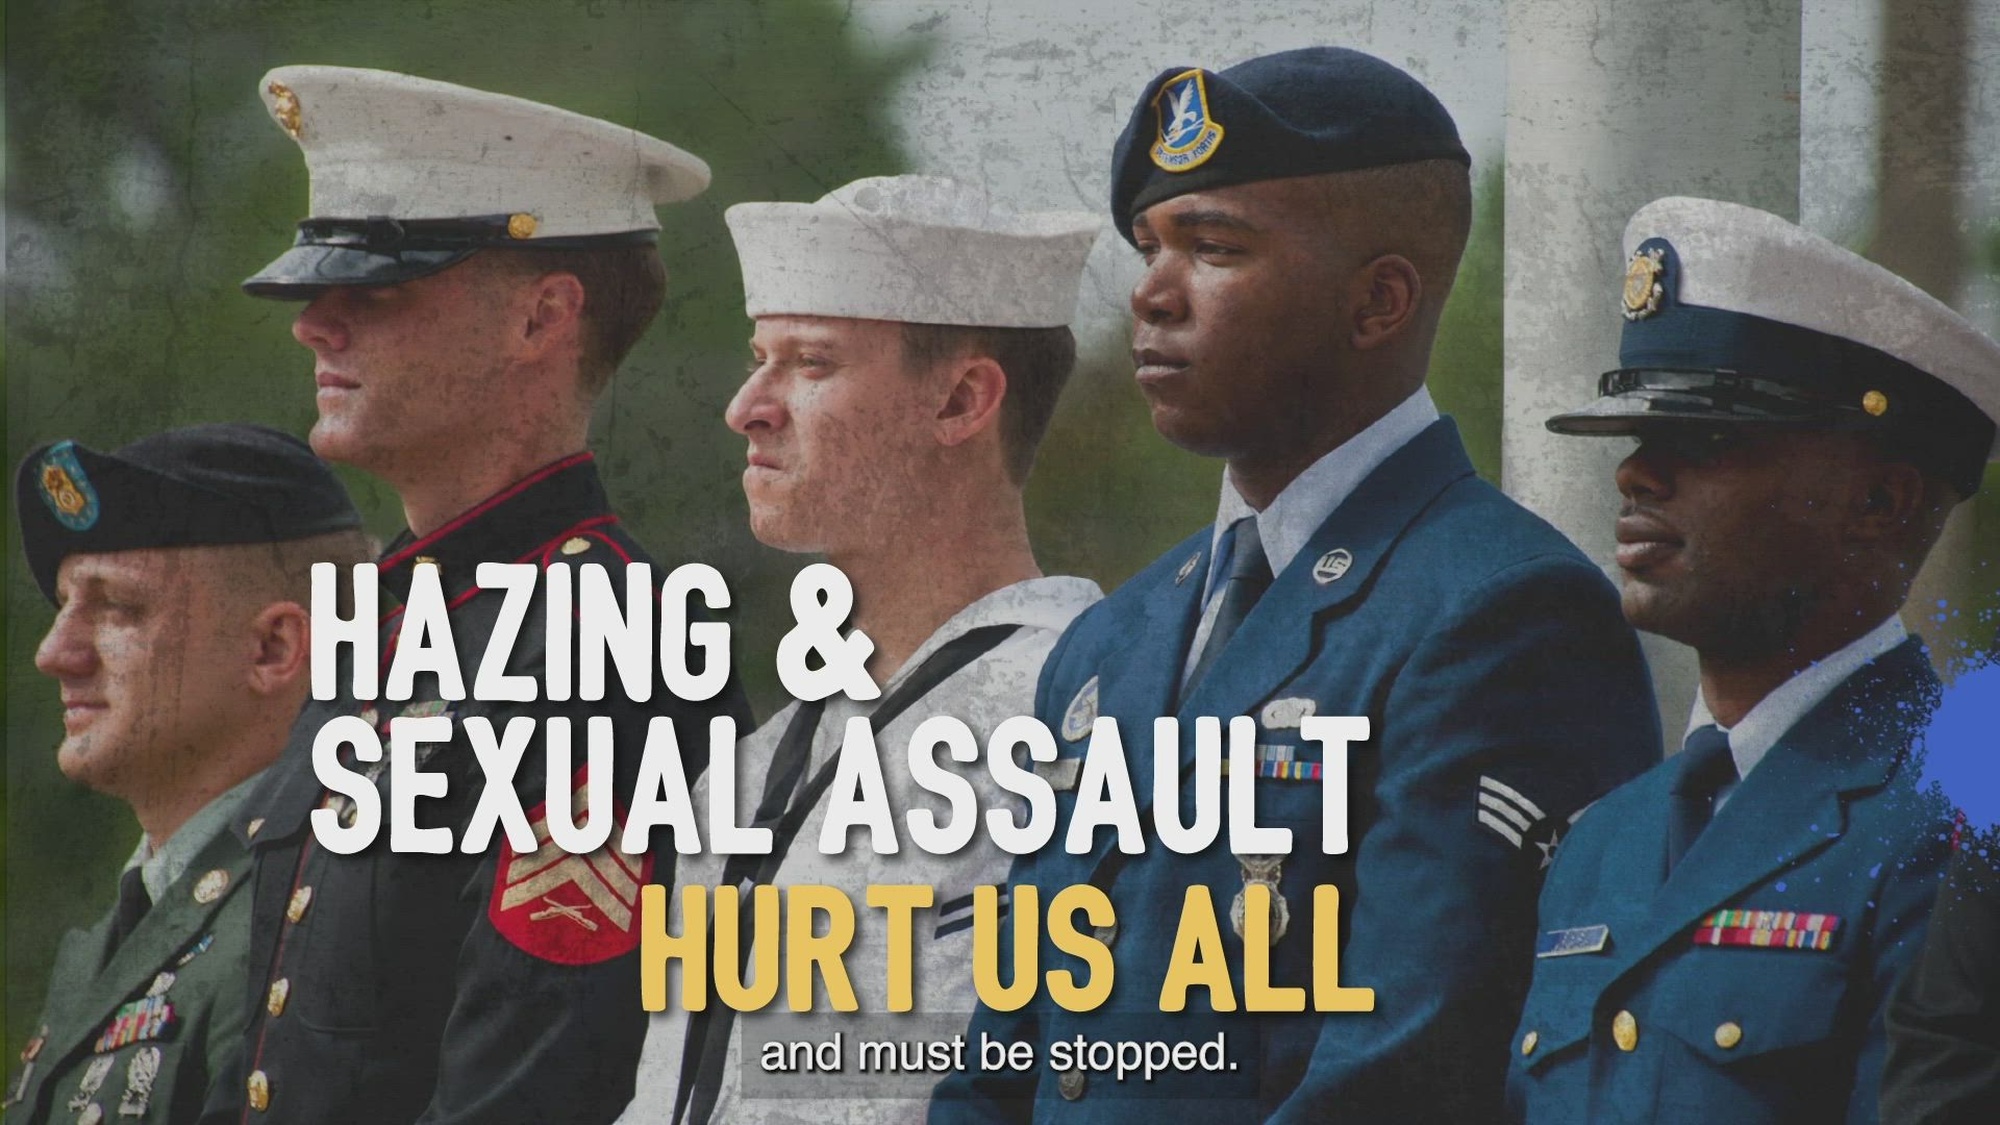 Men account for nearly half of all sexual assault victims in our military prevalence surveys. However, the Department estimates that only 17 percent of male victims report their sexual assault, compared with 38 percent of female victims.

The DoD Sexual Assault Prevention Response Office (SAPRO) is launching an outreach campaign with a series of videos and print materials focused on the experience of men. The "Men's Sexual Assault Prevention and Response (SAPR)
Campaign" will address the toll that sexual assault takes on the individual, the unit, and the force, and also provide information about the kinds of help and support available. While this campaign is focused on men, many elements of the campaign are relevant to all Service members affected by sexual assault.

The campaign acknowledges Courage can take many forms. Coping and surviving with the aftermath of sexual assault takes Courage. The willingness to acknowledge the benefits of seeking available help and resources reflects Courage. There is Courage in moving through the healing process and finding your unique path to recovery. Courage is evident when a friend or loved one steps forward and offers to help. There is Courage in maintaining a command climate that prevents, responds to, and supports Service members who are affected by sexual assault or at higher risk of sexual violence. Courage helps us start over despite doubts and worries. We honor all these forms of Courage.

Powerful acts of Courage can fuel change.

For confidential 24/7 crisis intervention, call or visit the DoD Safe Helpline at 877-995-5247 or www.safehelpline.org